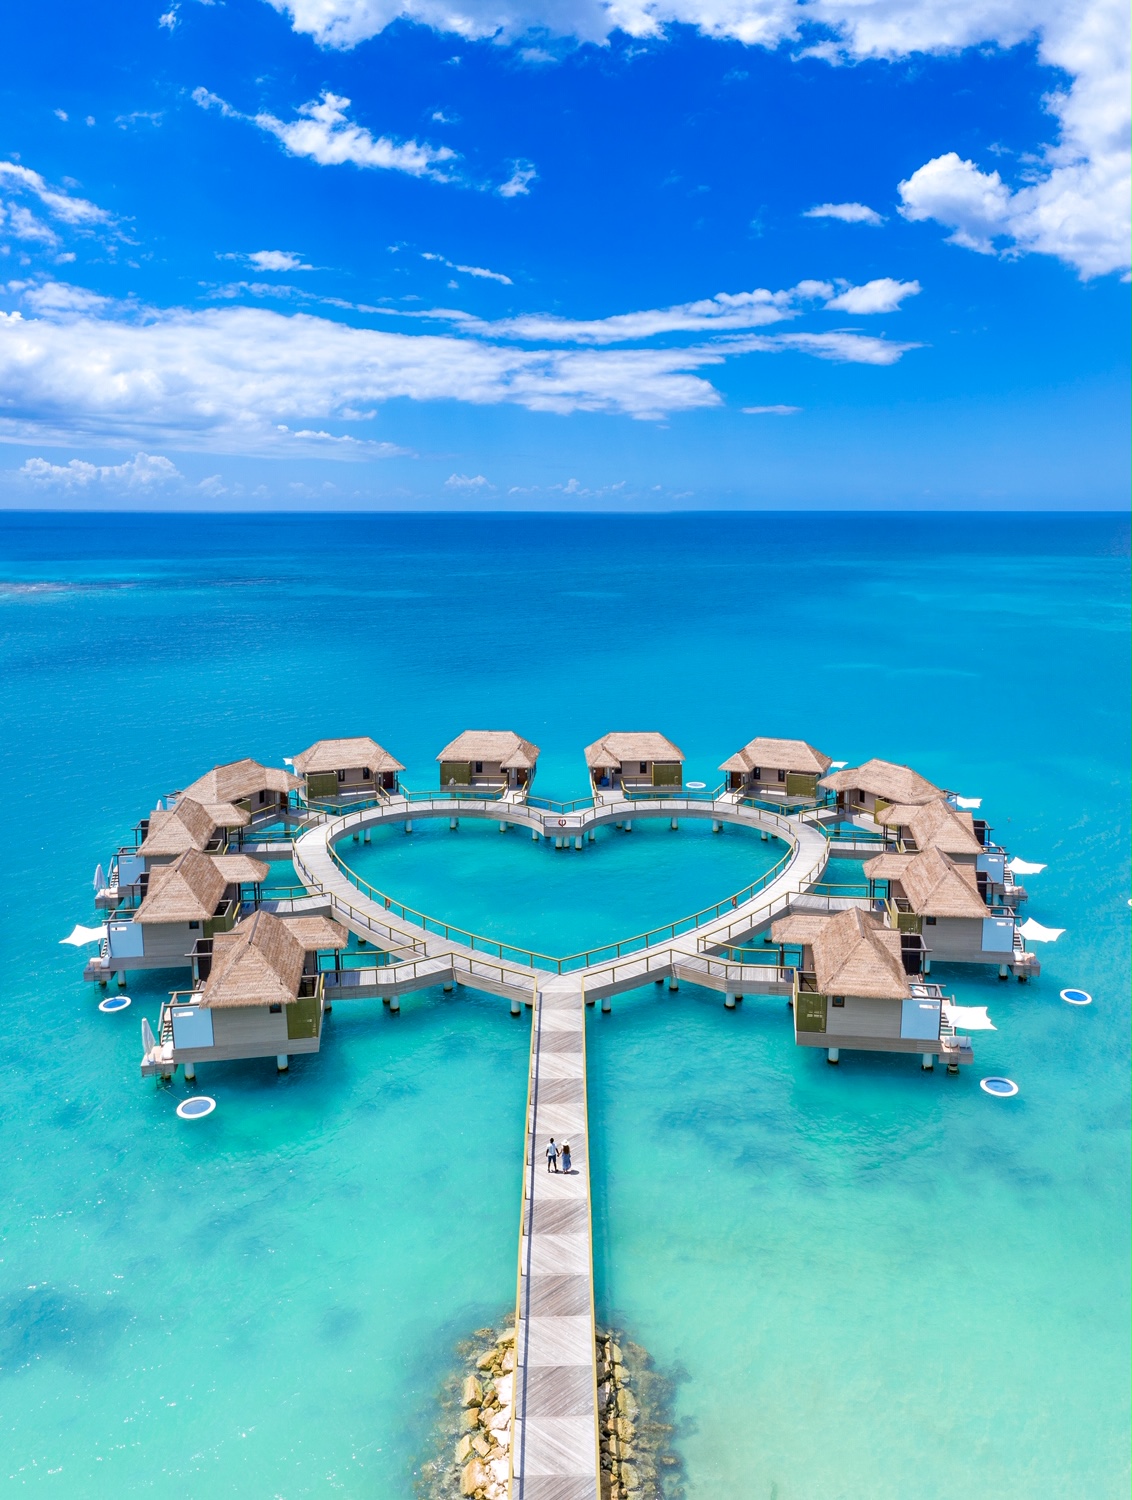 Couple walking over a wooden deck towards a ground of overwater bungalows near Florida that are around a heart shaped deck.  